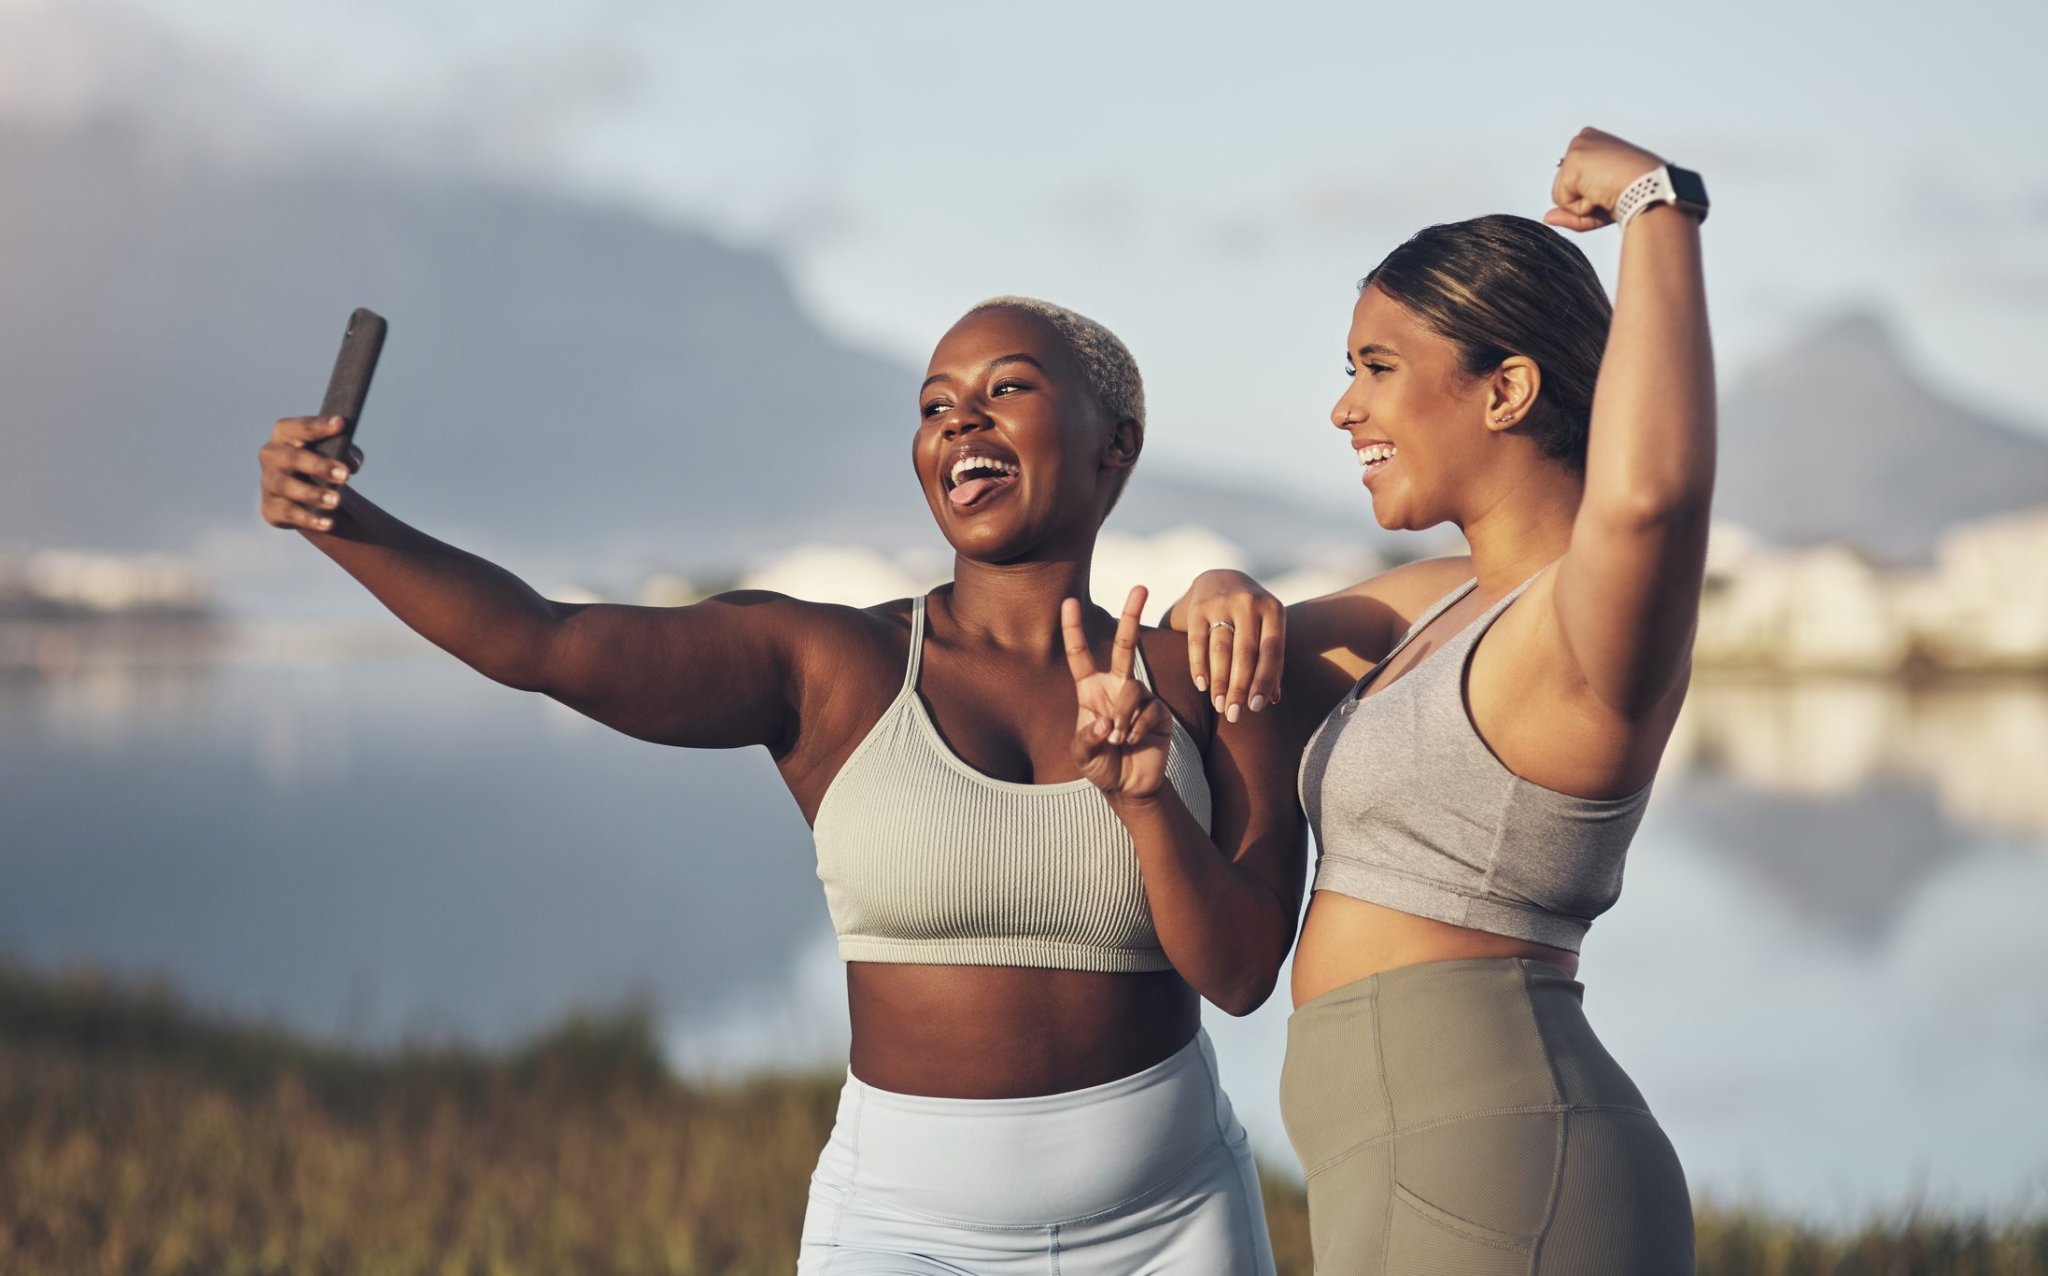 Research Says This One Goal Will Motivate You to Exercise—and It’s Not Weight Loss